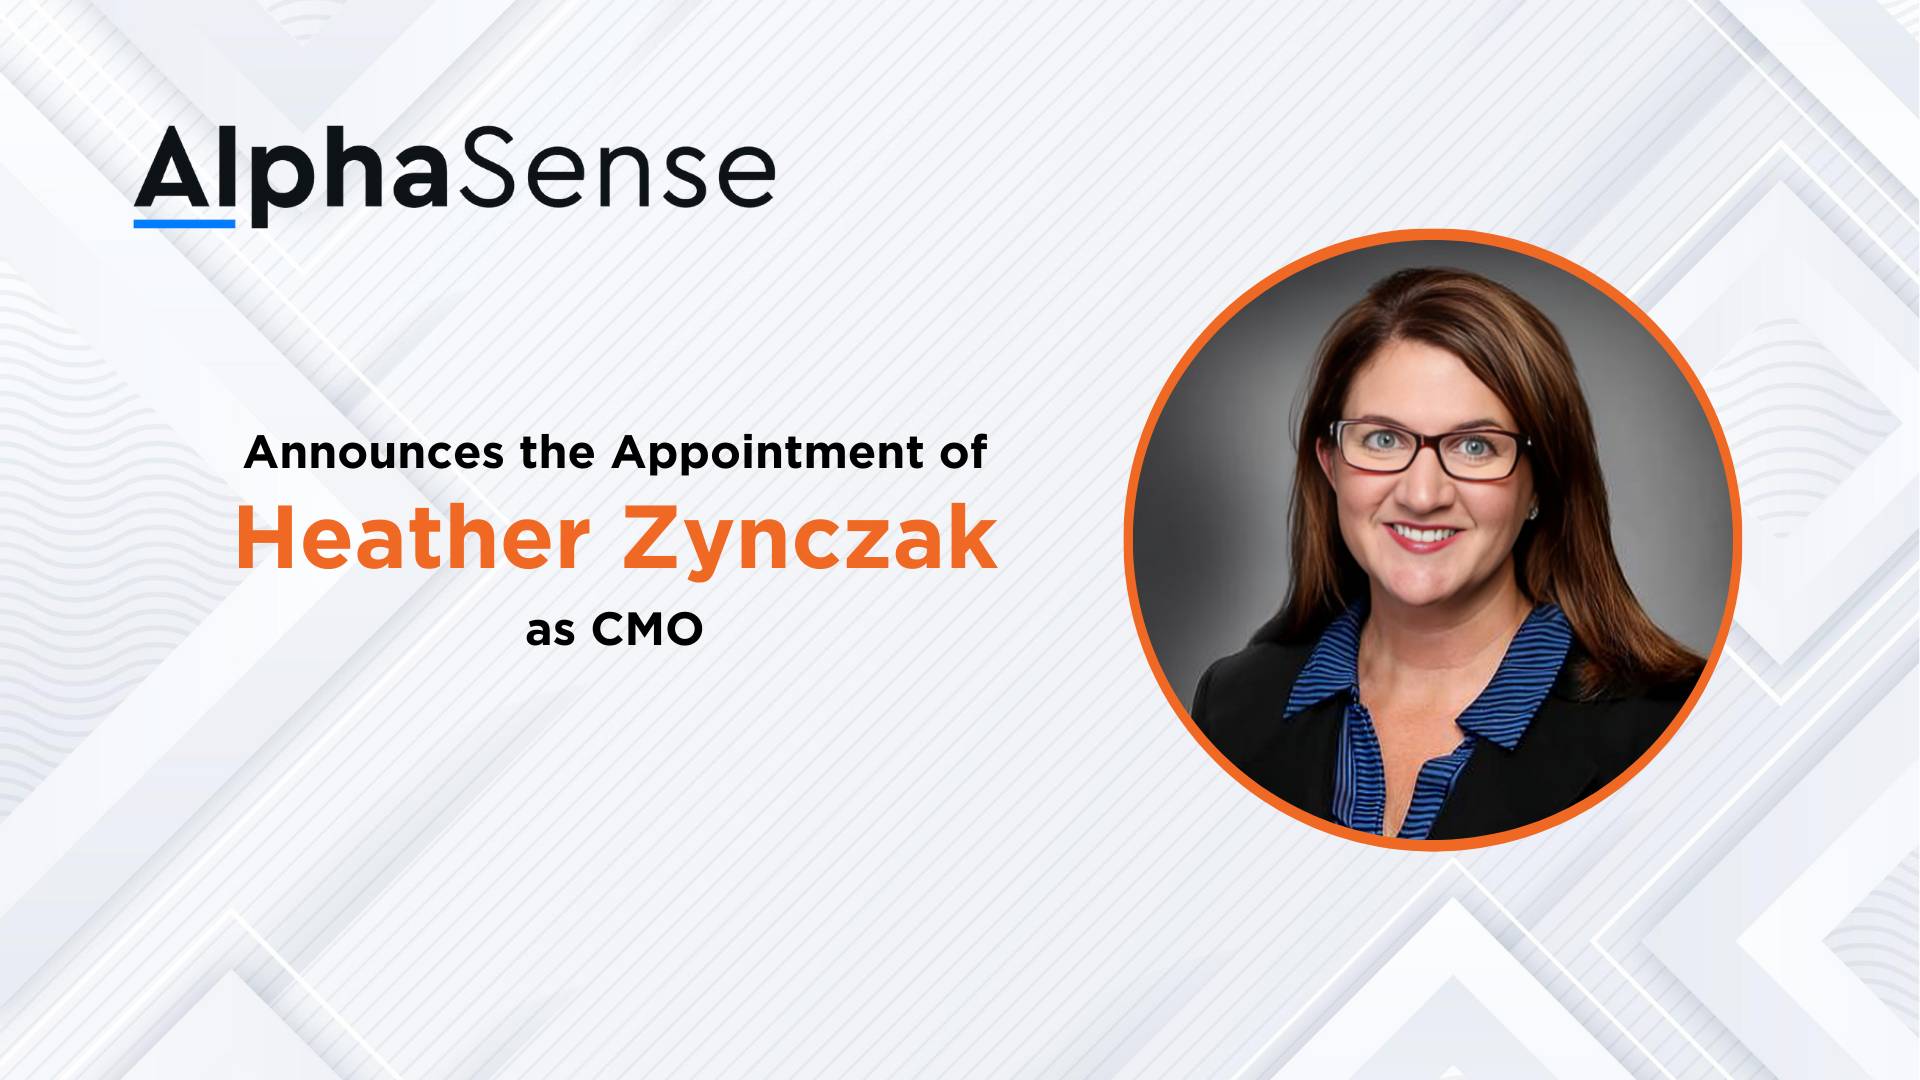 AlphaSense Appoints Heather Zynczak as CMO and Surpasses $200M in ARR